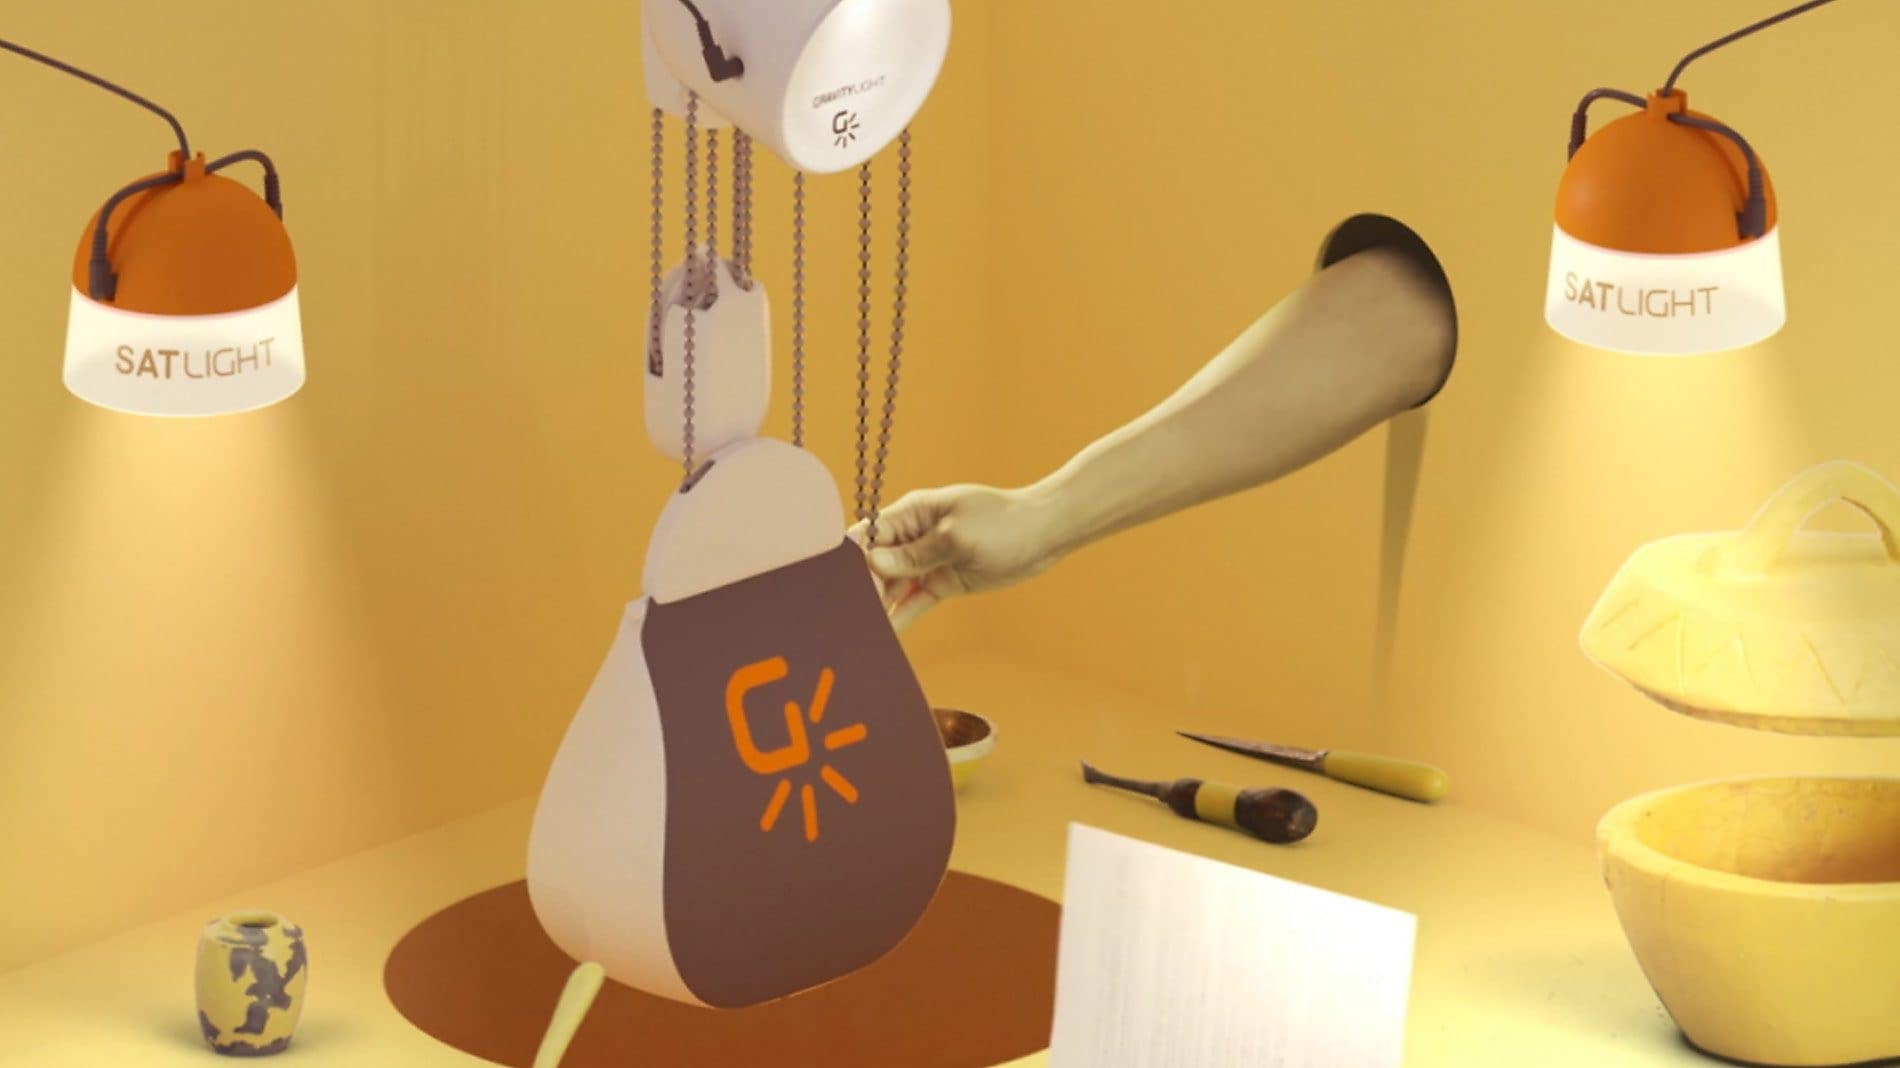 The gravity-powered lamp that is changing lives